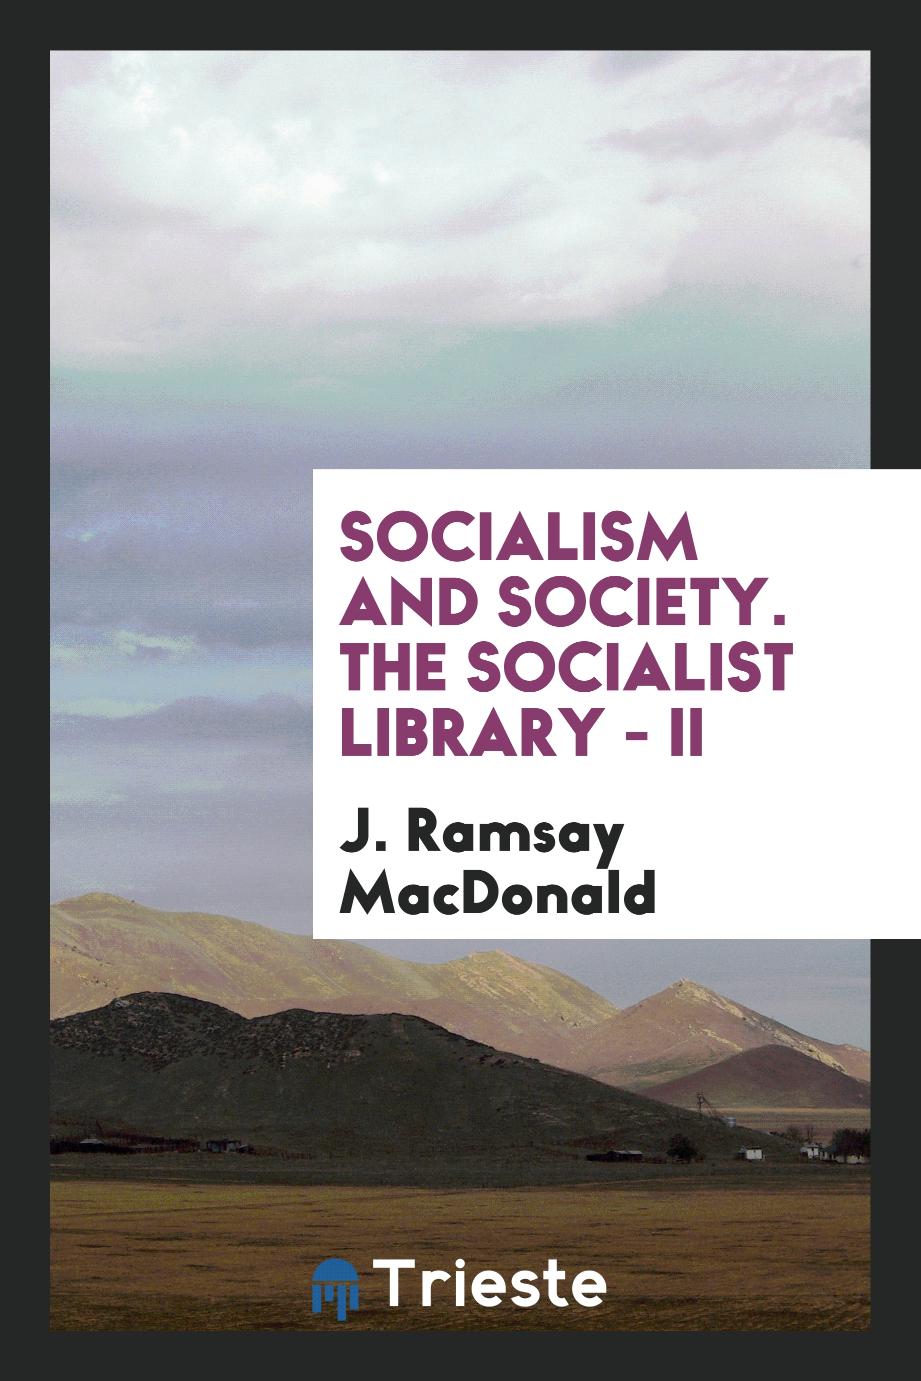 Socialism and Society. The Socialist Library - II